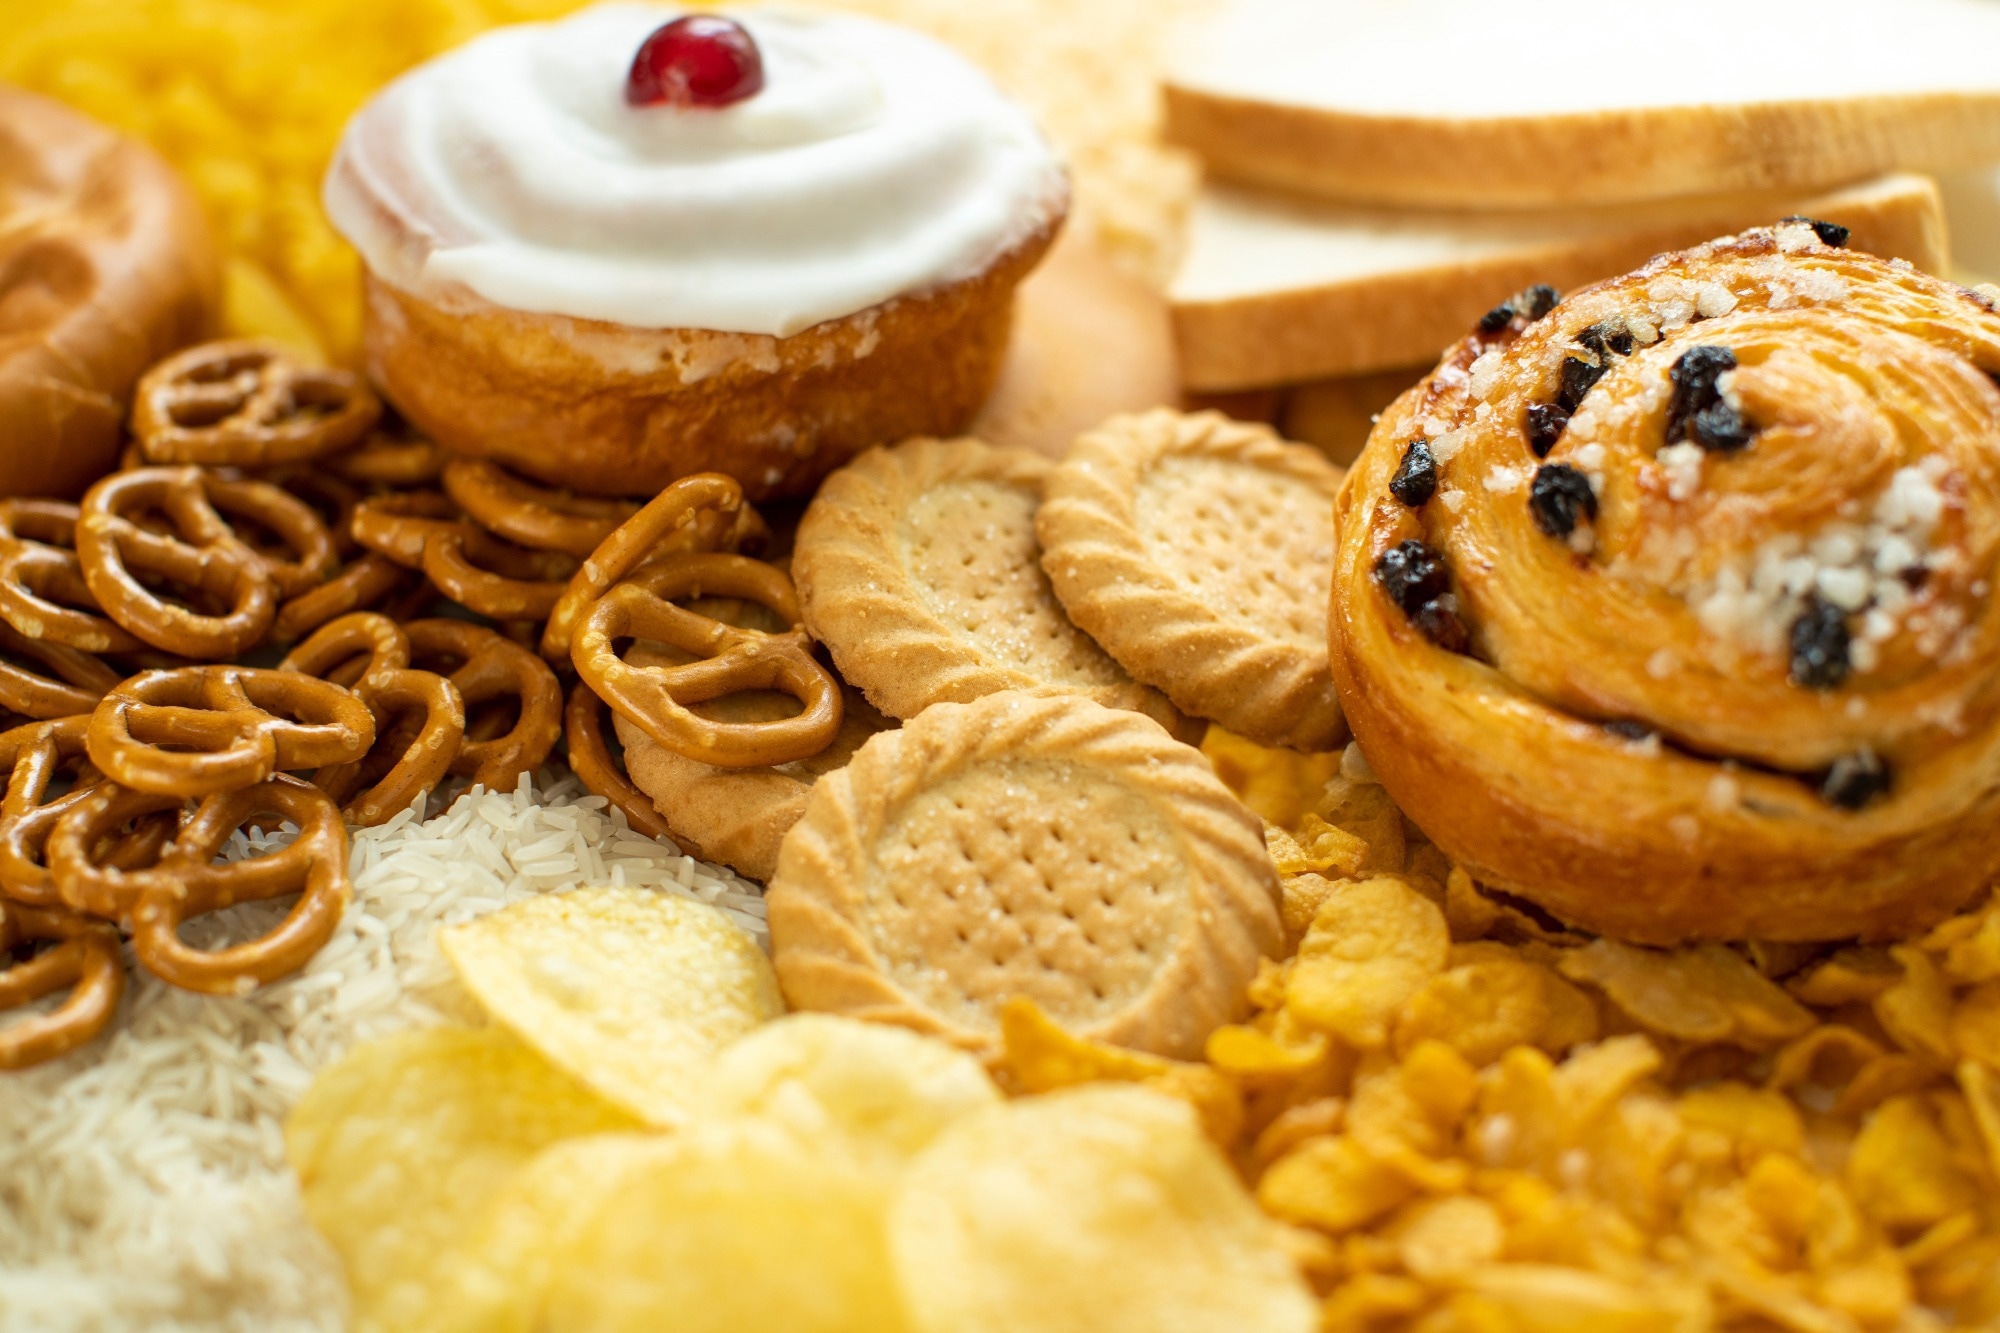 Study: Consumption of ultra-processed foods and risk of multimorbidity of cancer and cardiometabolic diseases: a multinational cohort study. Image Credit: Daisy Daisy/Shutterstock.com